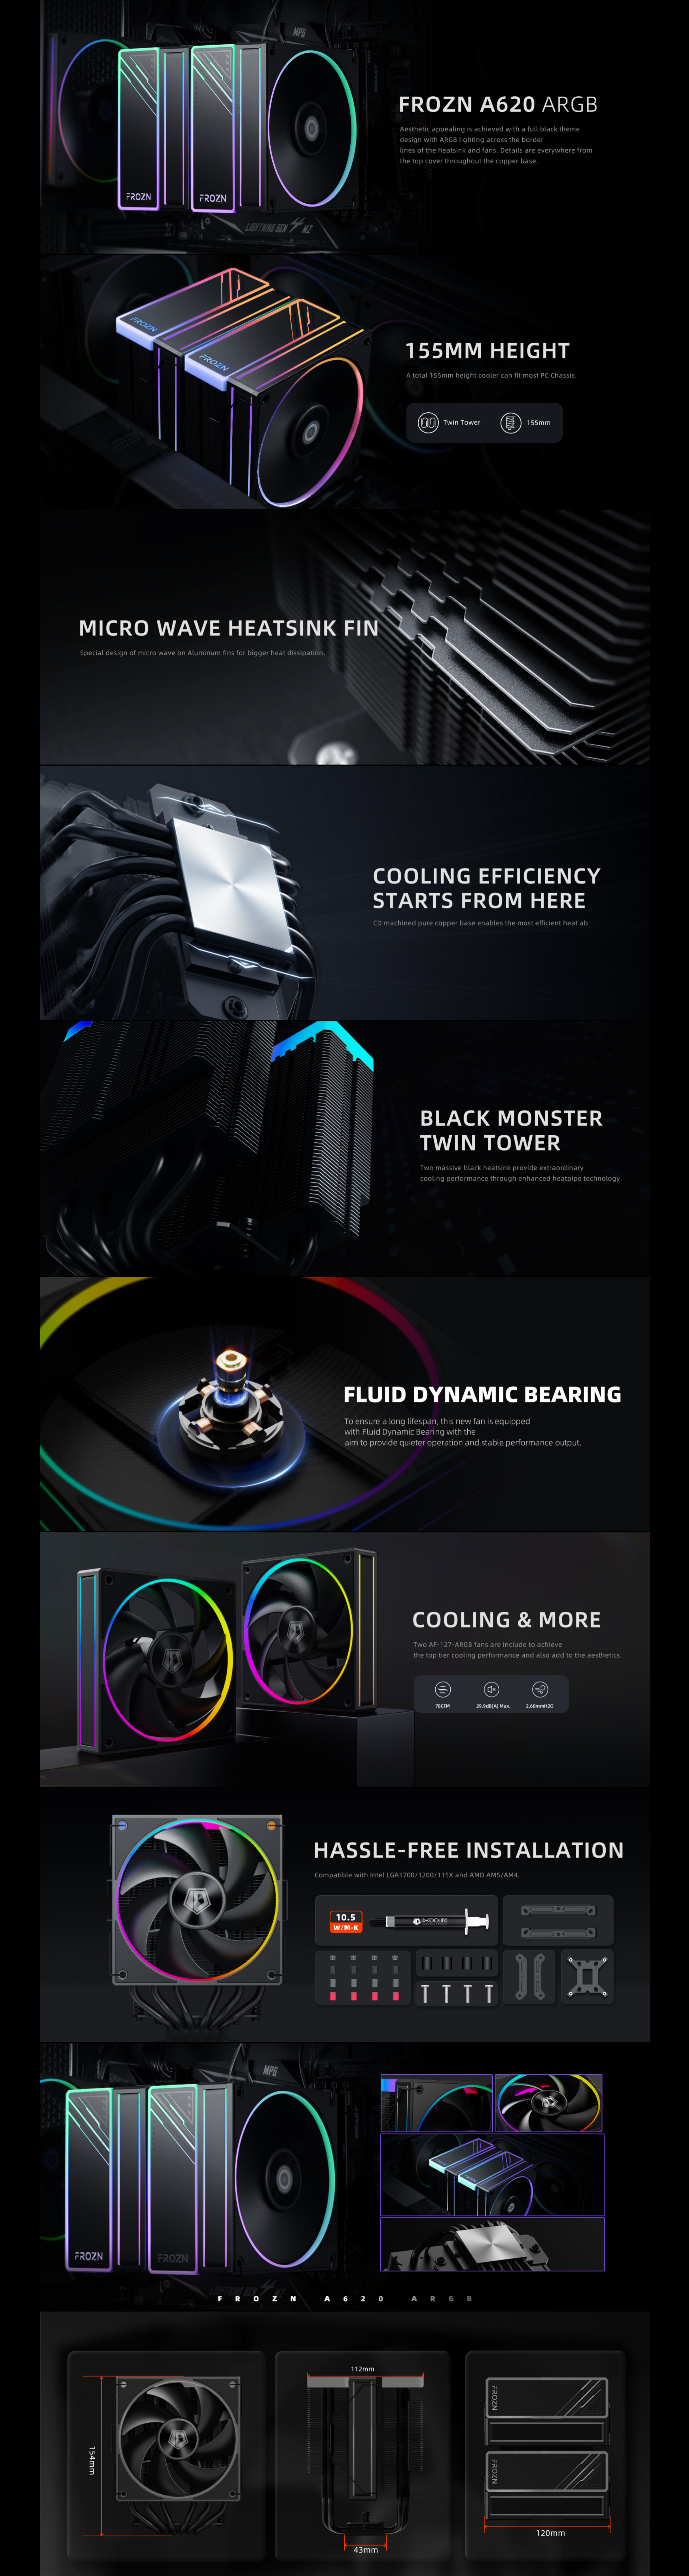 A large marketing image providing additional information about the product ID-COOLING FROZN A620 ARGB CPU Cooler - Black - Additional alt info not provided